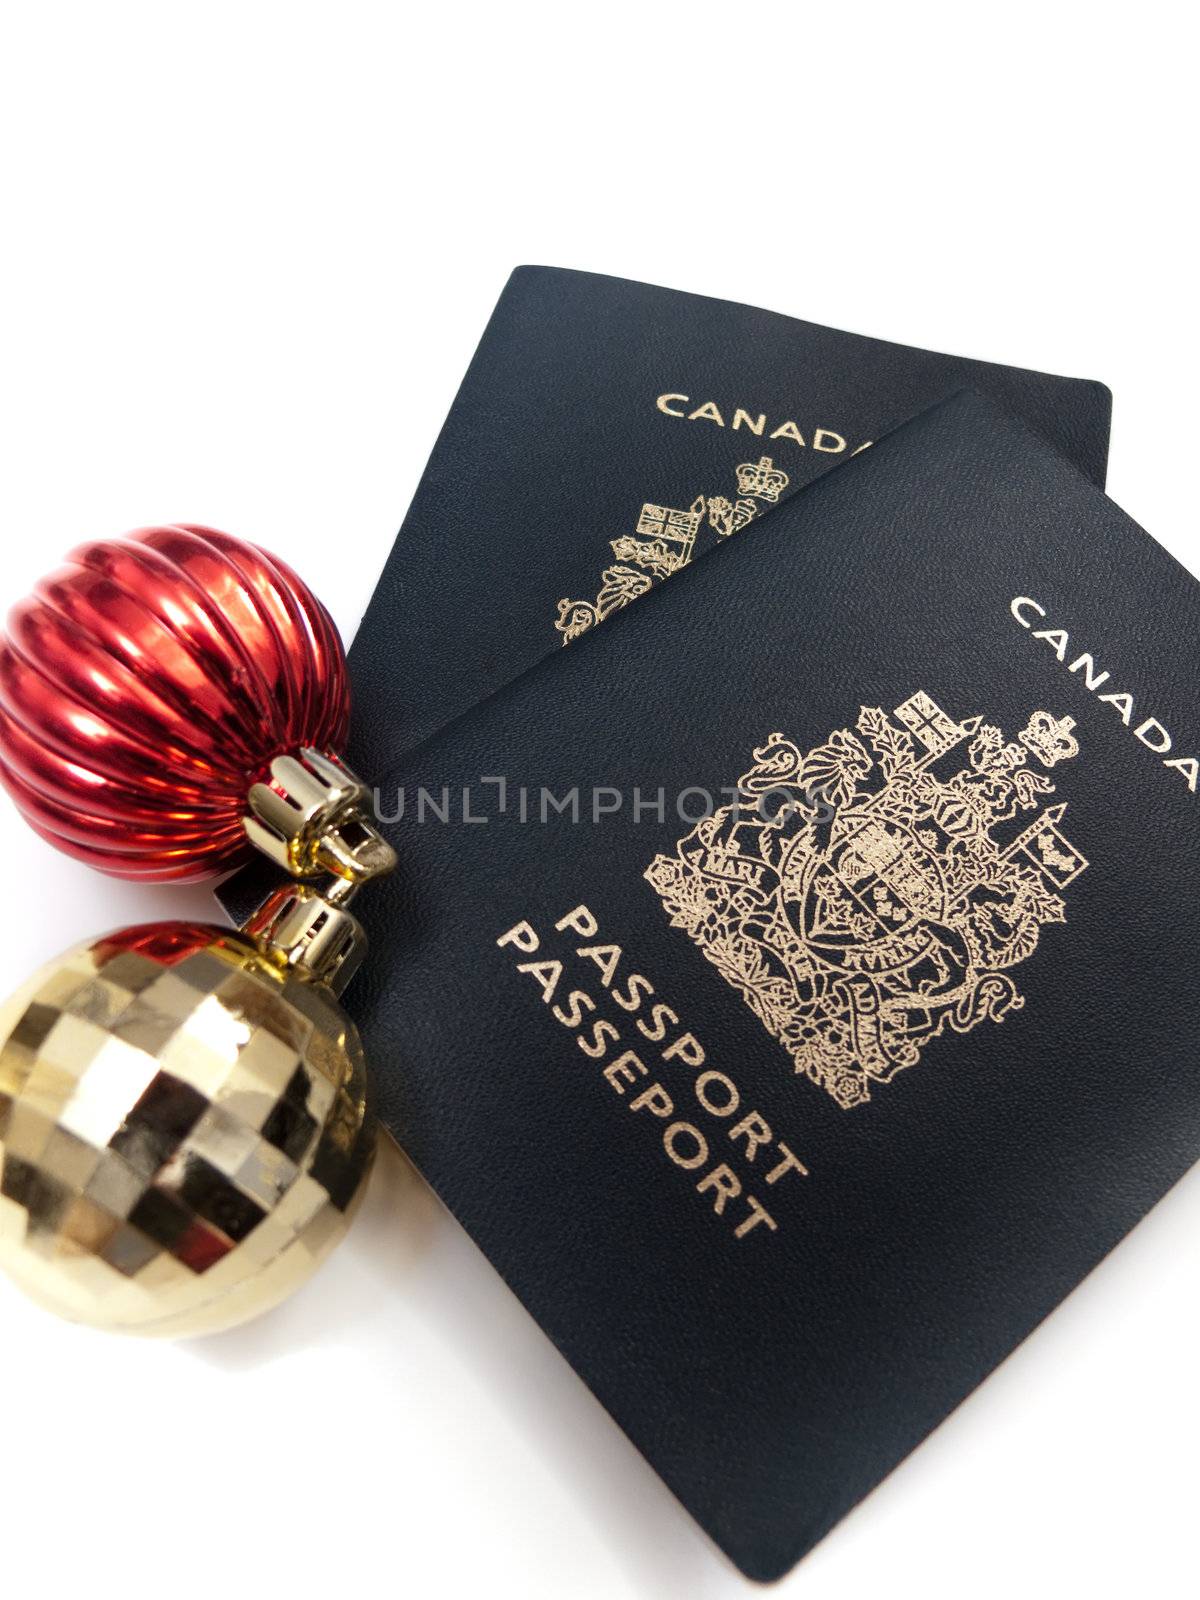 Ornaments and Passports by woodygraphs